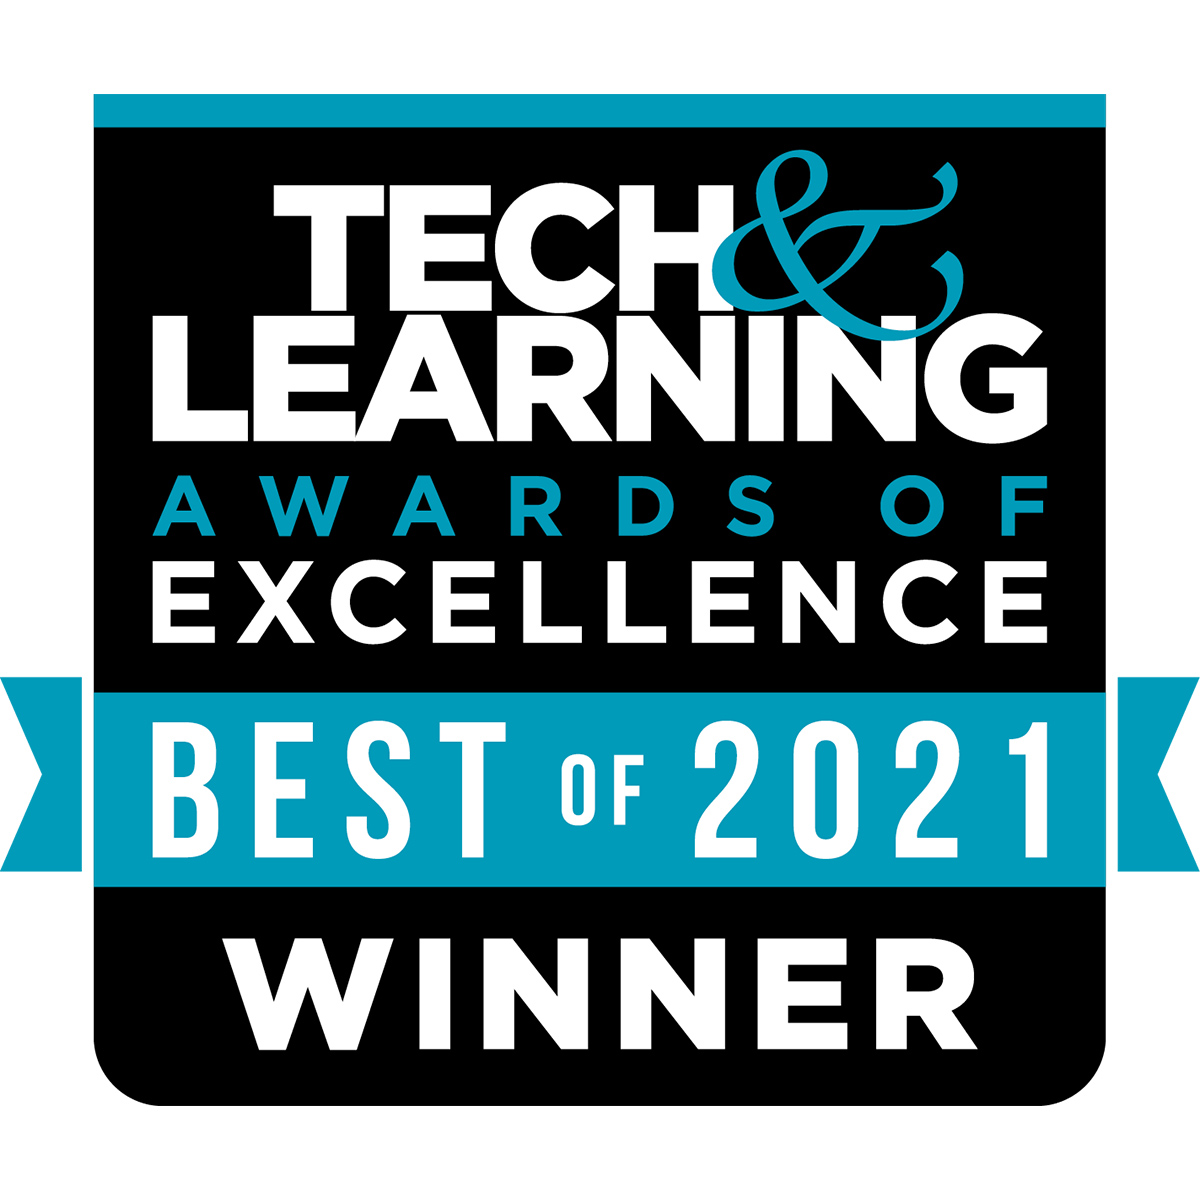 Tech & Learning Awards of Excellence: Best of 2021